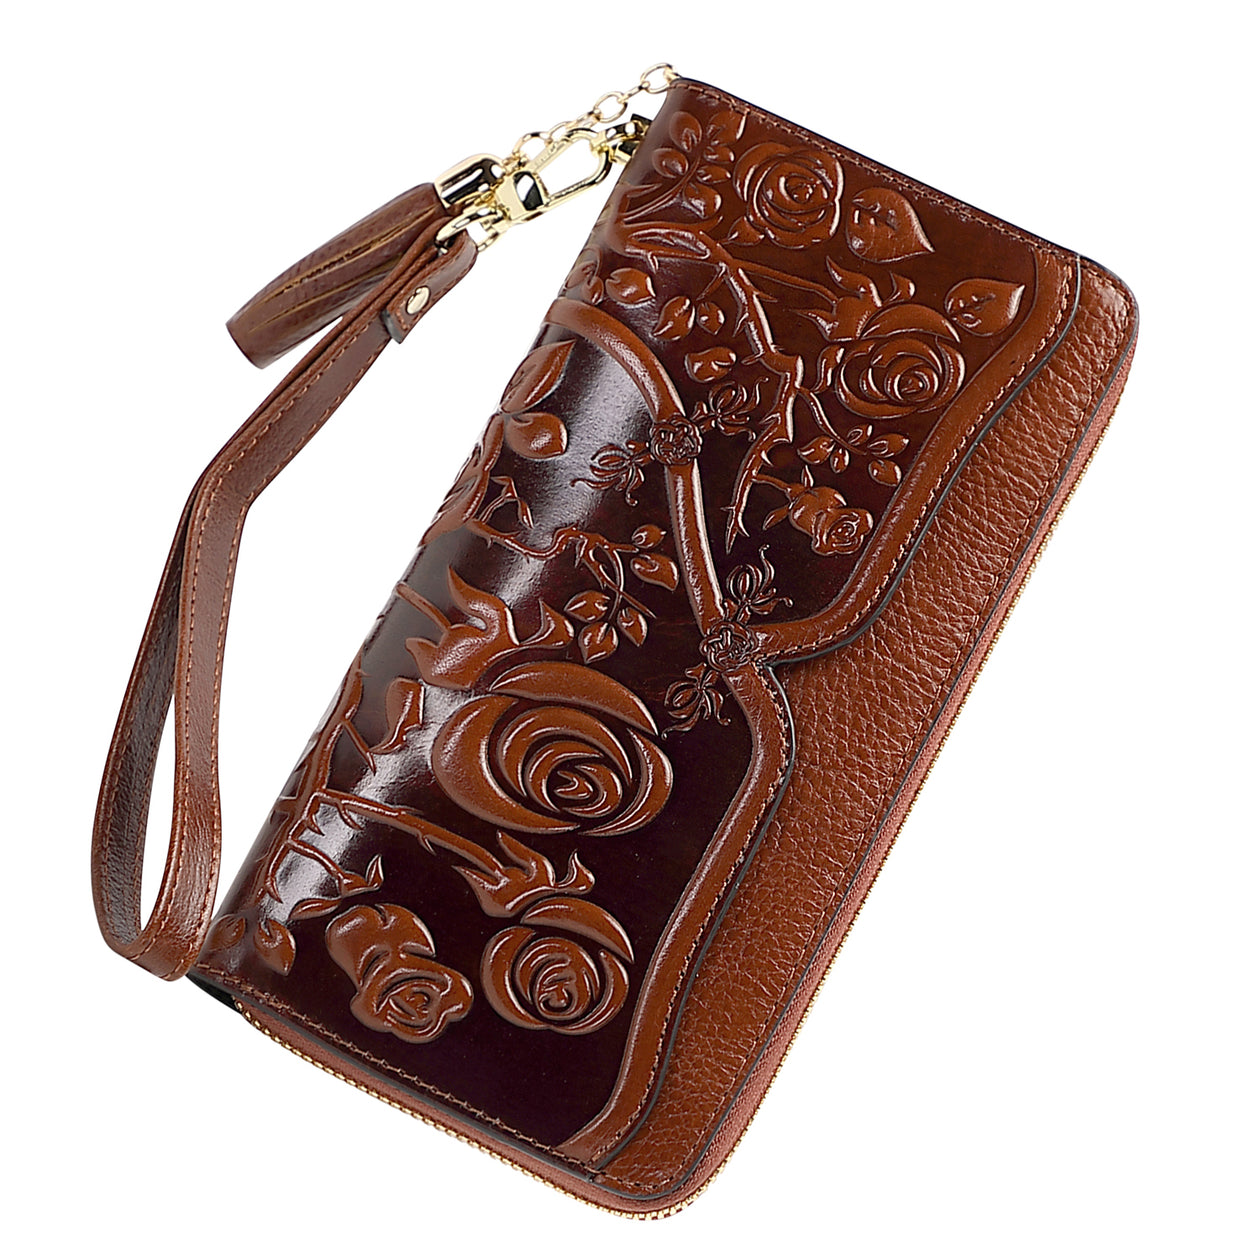 Designer Wallets with Flower, Hand Painted Womens Wallets, Handmade Wallet, Original Leather Embossed